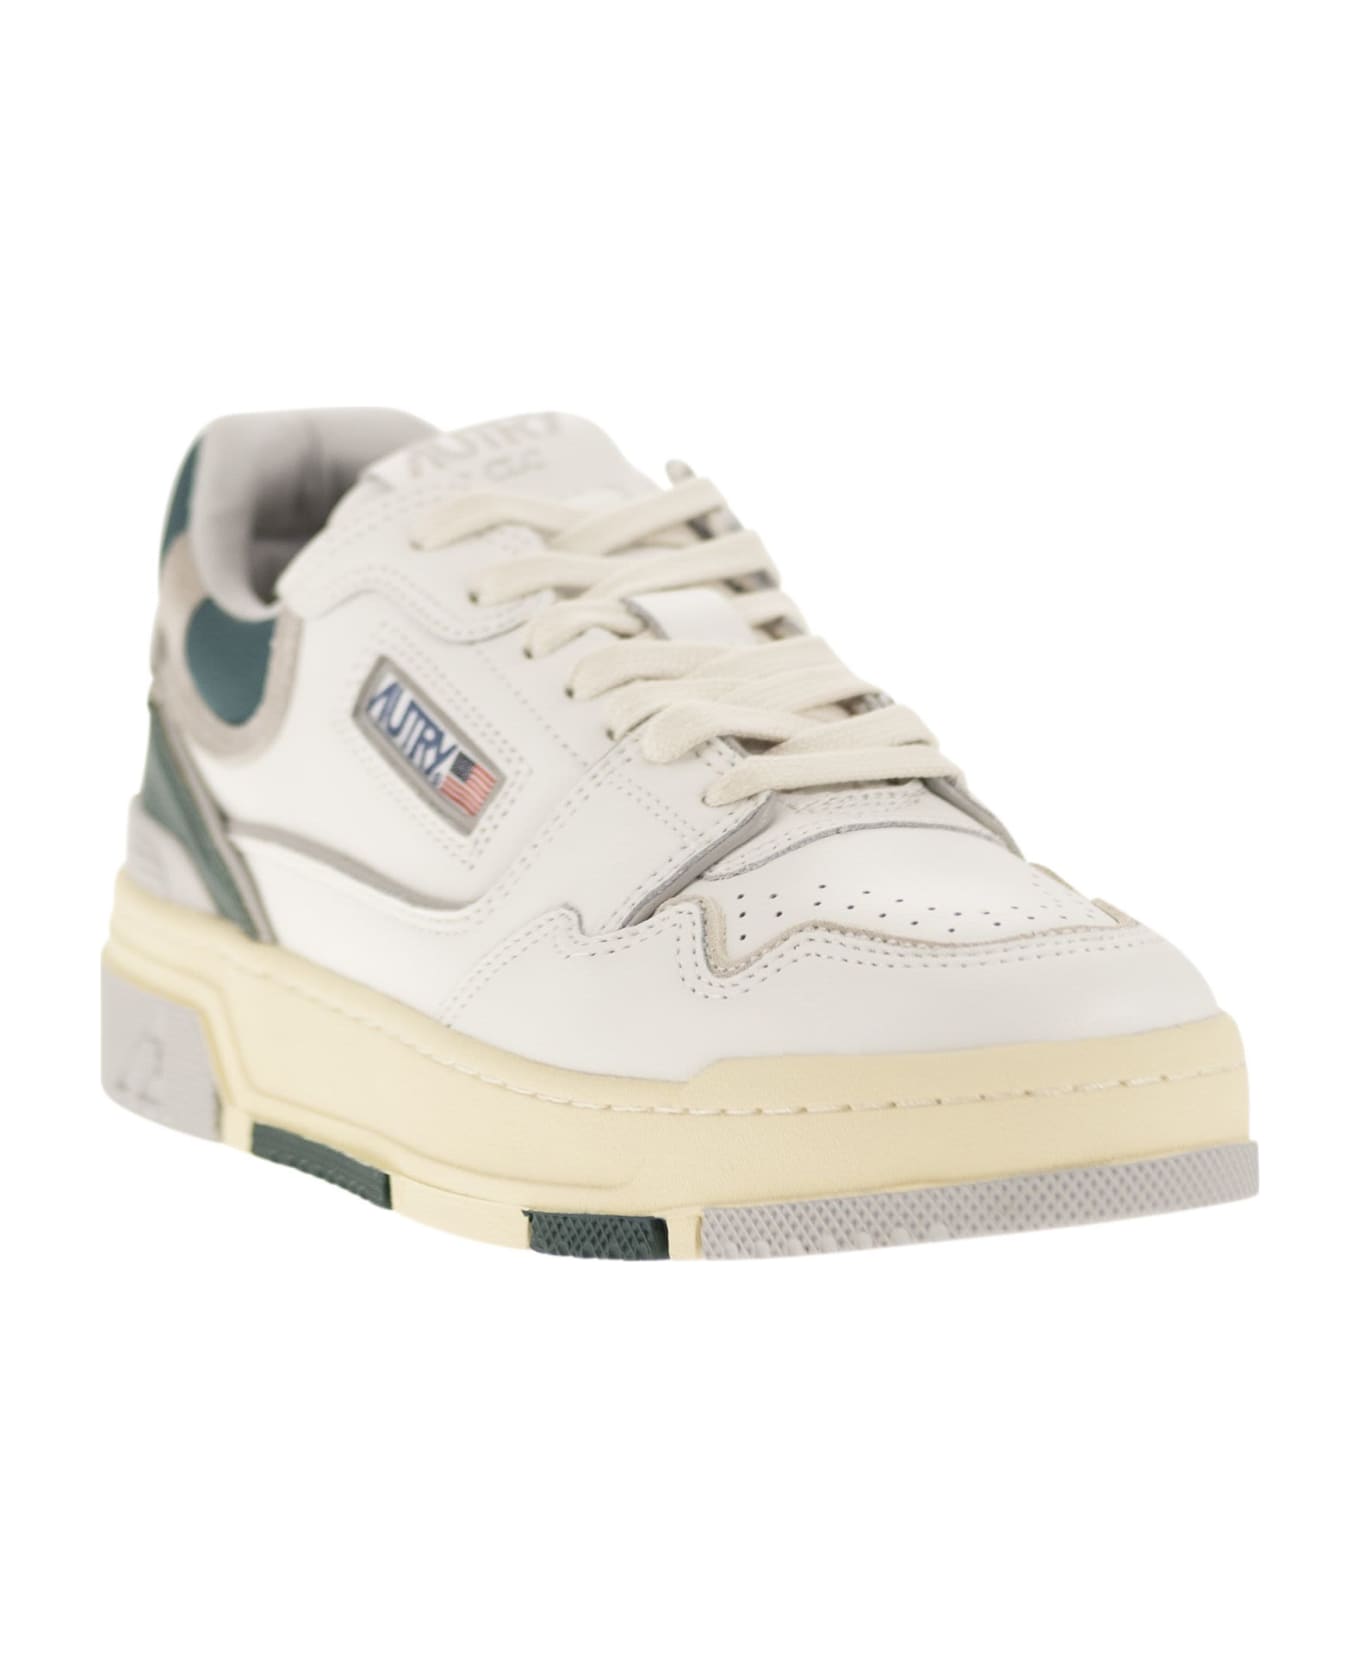 Autry Clc Leather Trainers - White/green